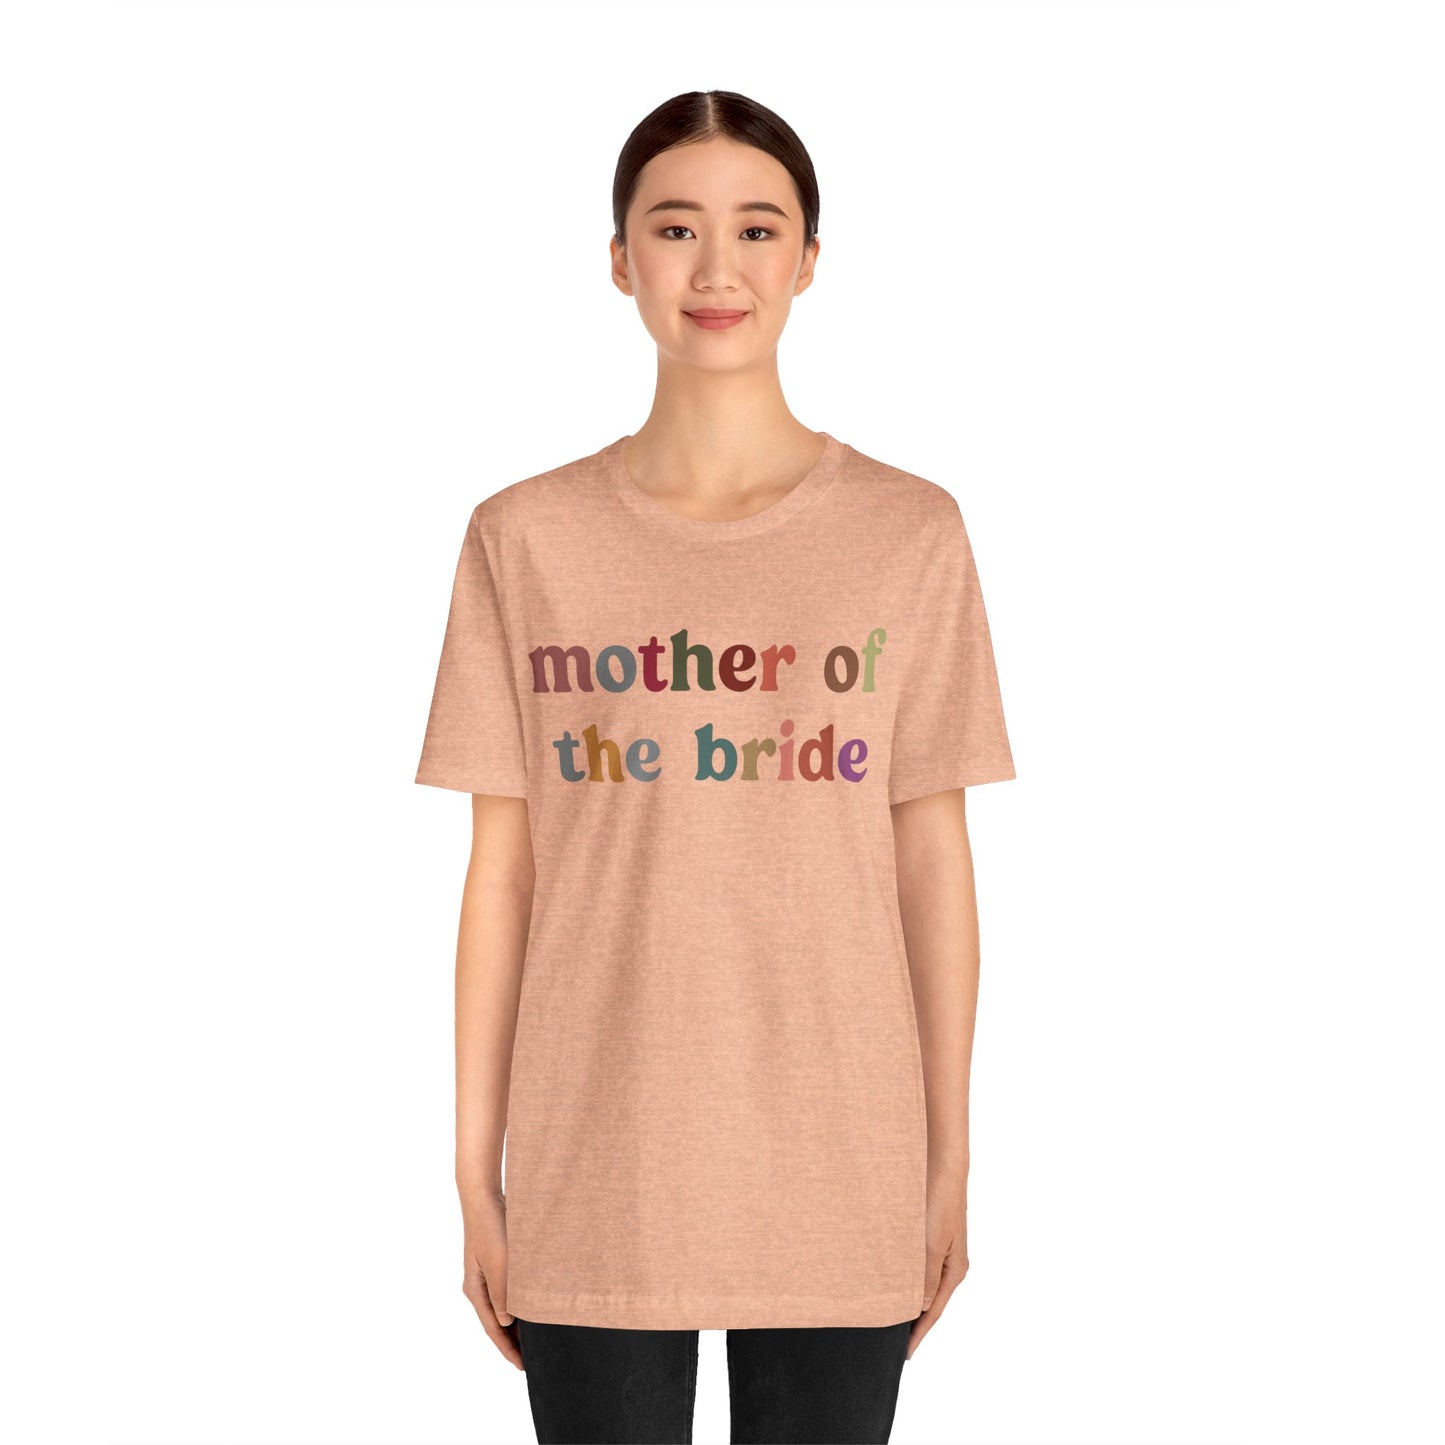 Mother of the Bride Shirt, Cute Wedding Gift from Daughter, Engagement Gift, Retro Wedding Gift for Mom, Bridal Party Shirt for Mom, T1145